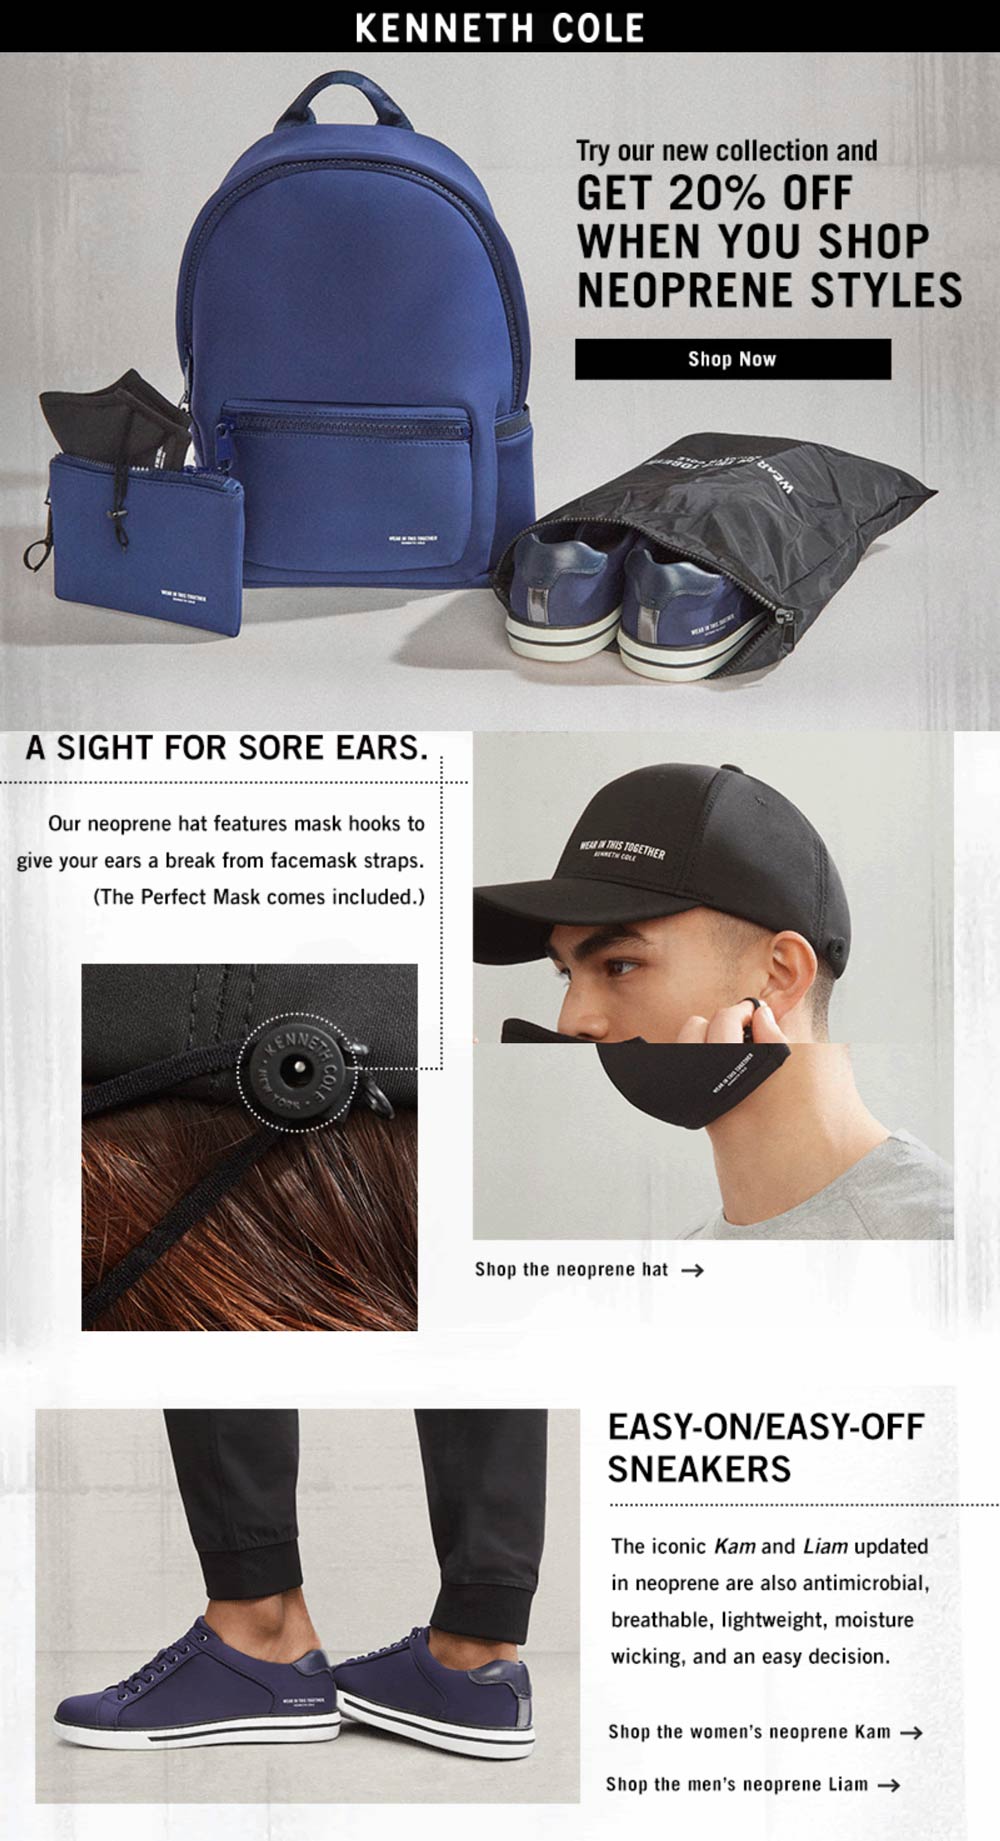 Kenneth Cole stores Coupon  20% off neoprene styles at Kenneth Cole #kennethcole 